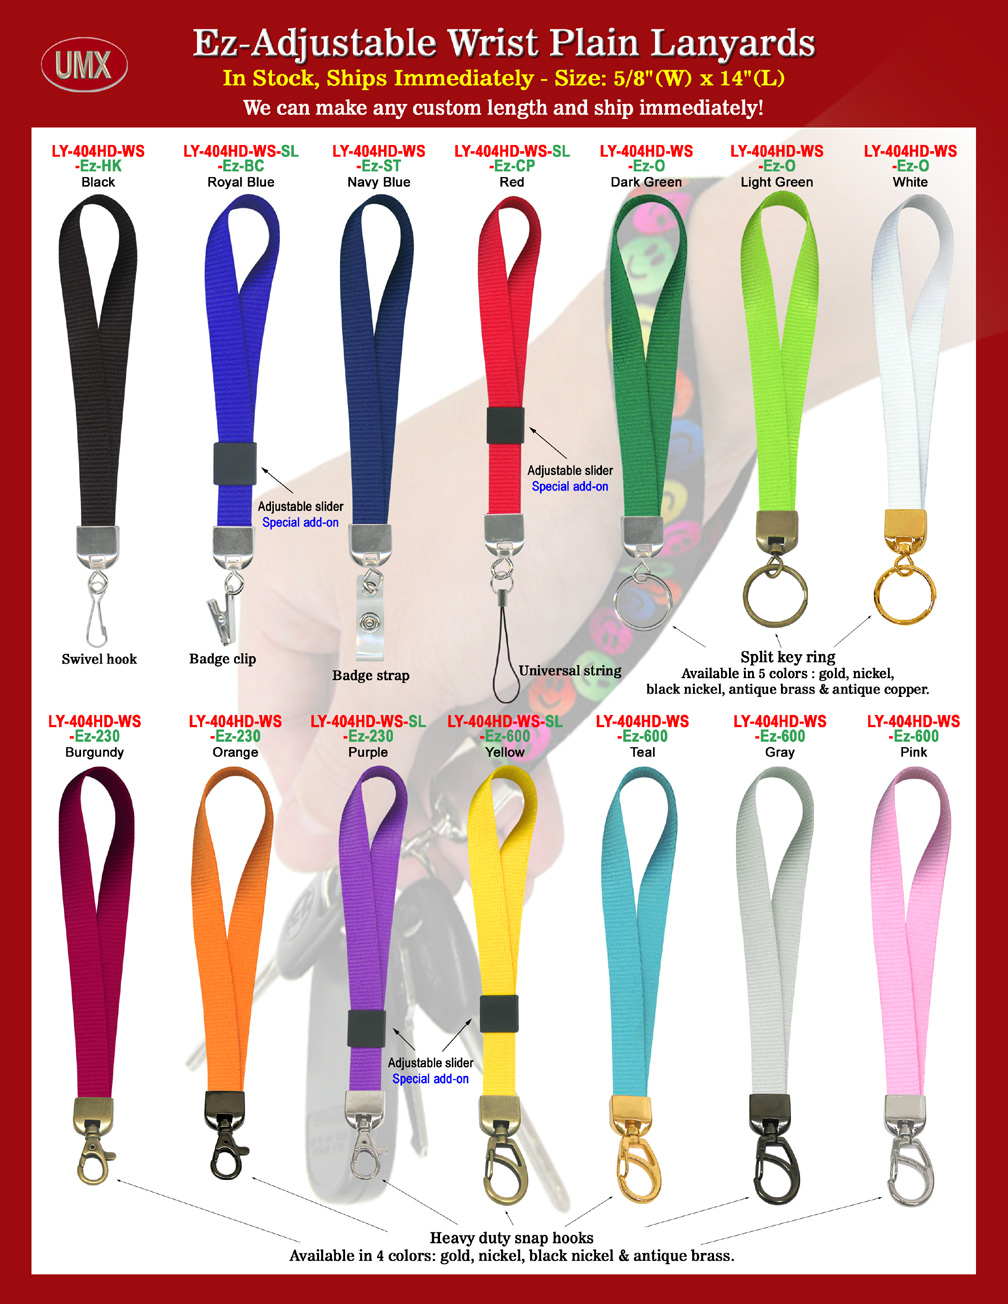 Ez-Adjustable Plain Color 5/8" Wrist Lanyards. The heavy duty and high quality wrist straps come with black, red, white, royal blue, navy blue, burgundy, dark green, light green, pink, orange, yellow, purple, gray and teal color available. You can order custom PMS color of wrist strap for you special application too.